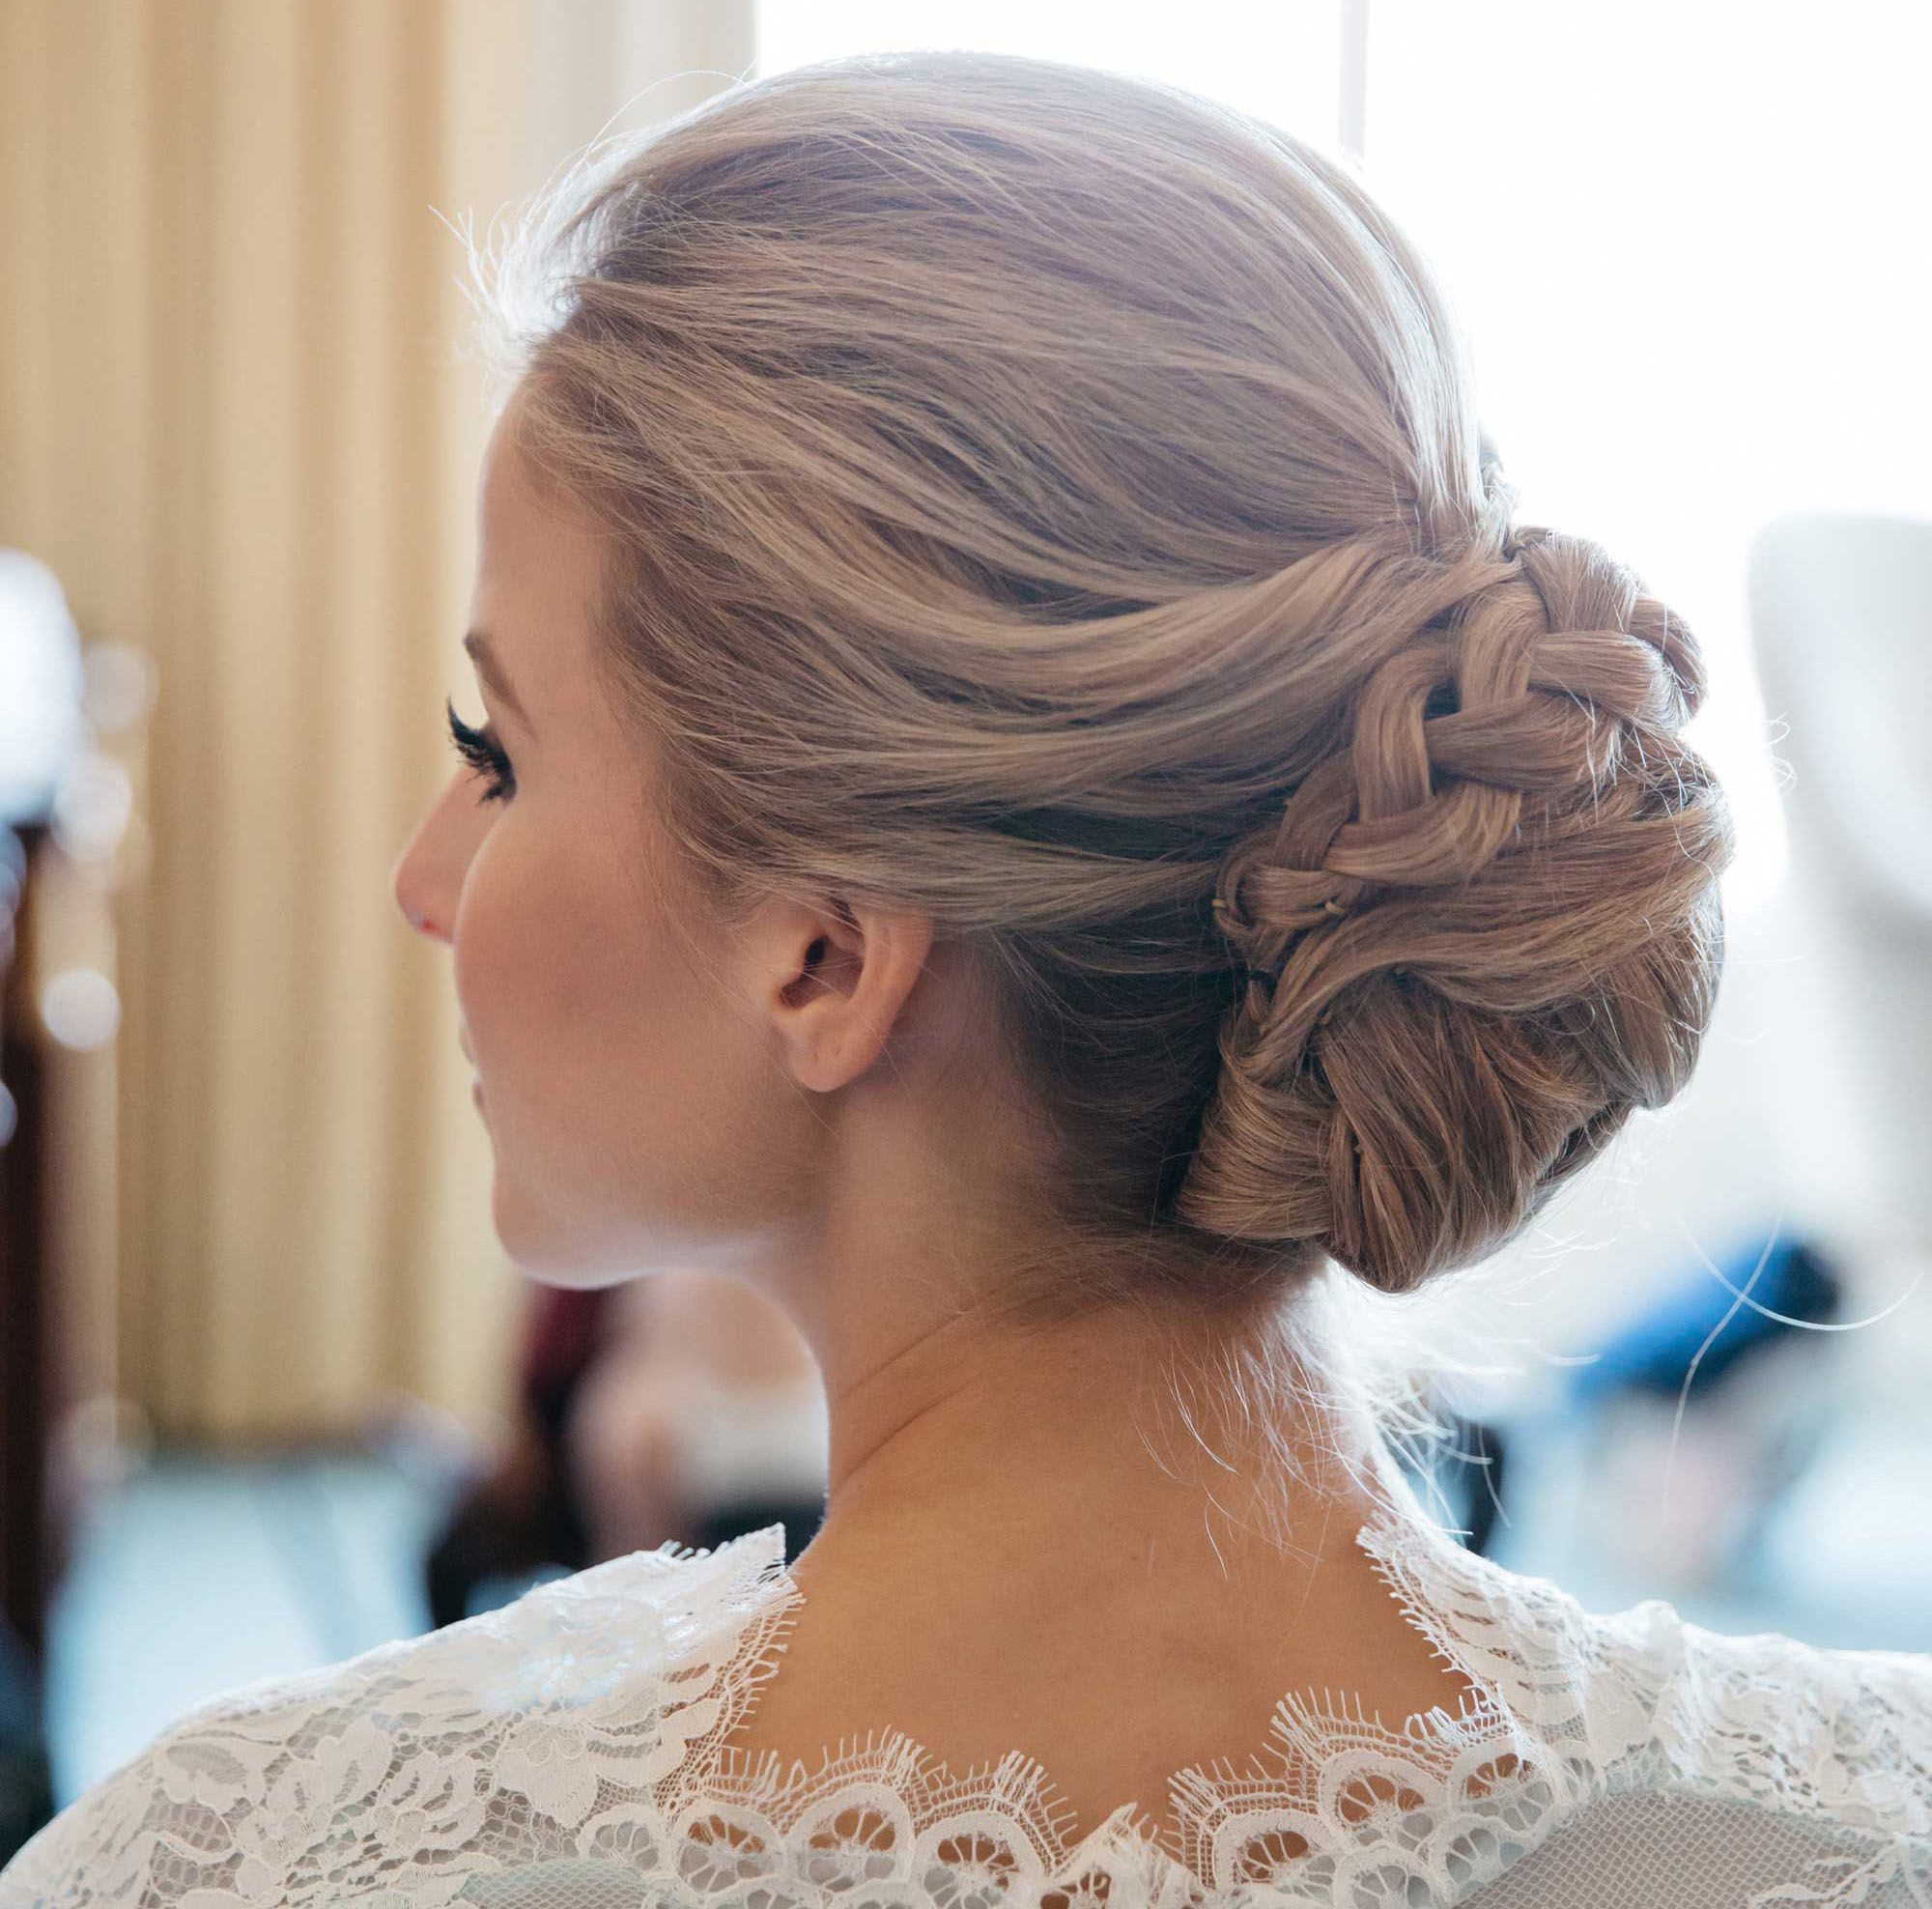 Current Retro Wedding Hair Updos With Small Bouffant With Regard To Braided Hairstyles: 5 Ideas For Your Wedding Look – Inside Weddings (View 6 of 20)